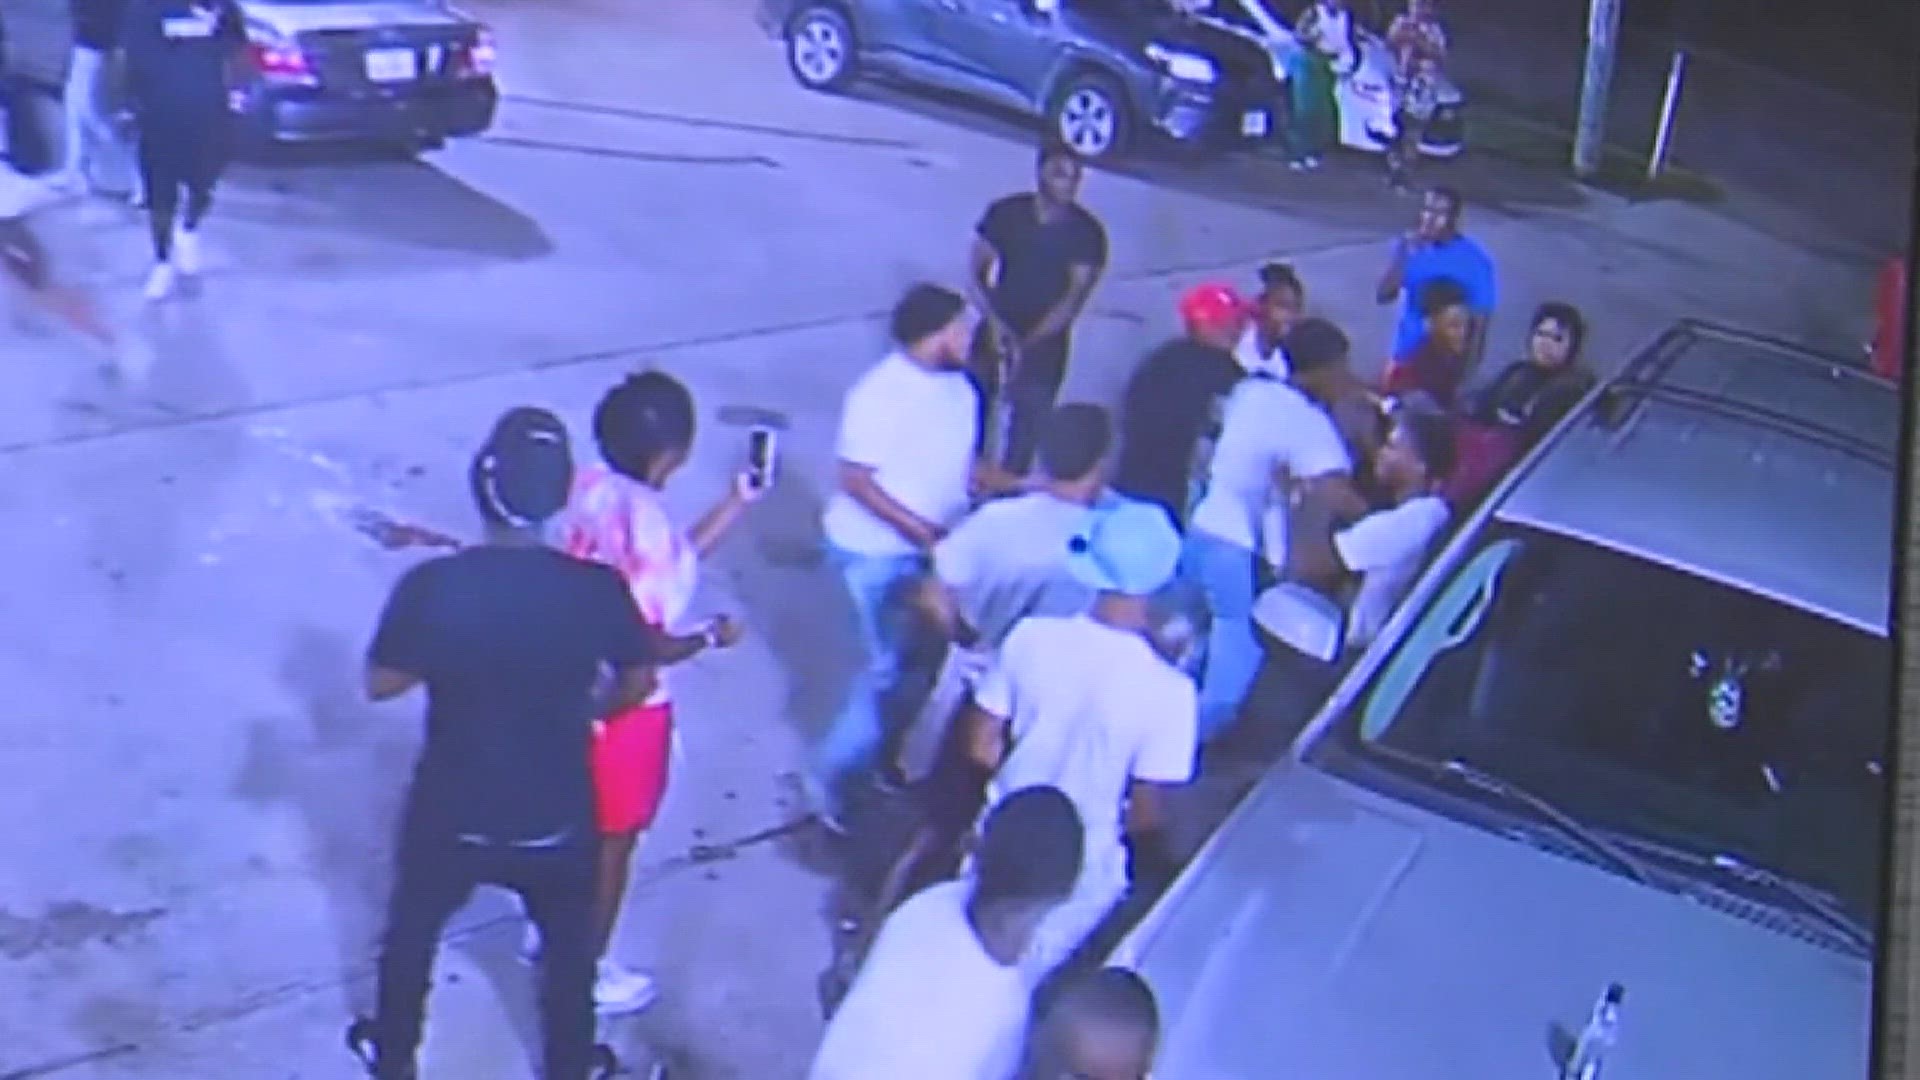 Eleven men, ranging in ages 17 to 33, are facing aggravated assault charges in connection to the brutal beating of a 22-year-old at a Shell gas station in Beaumont.